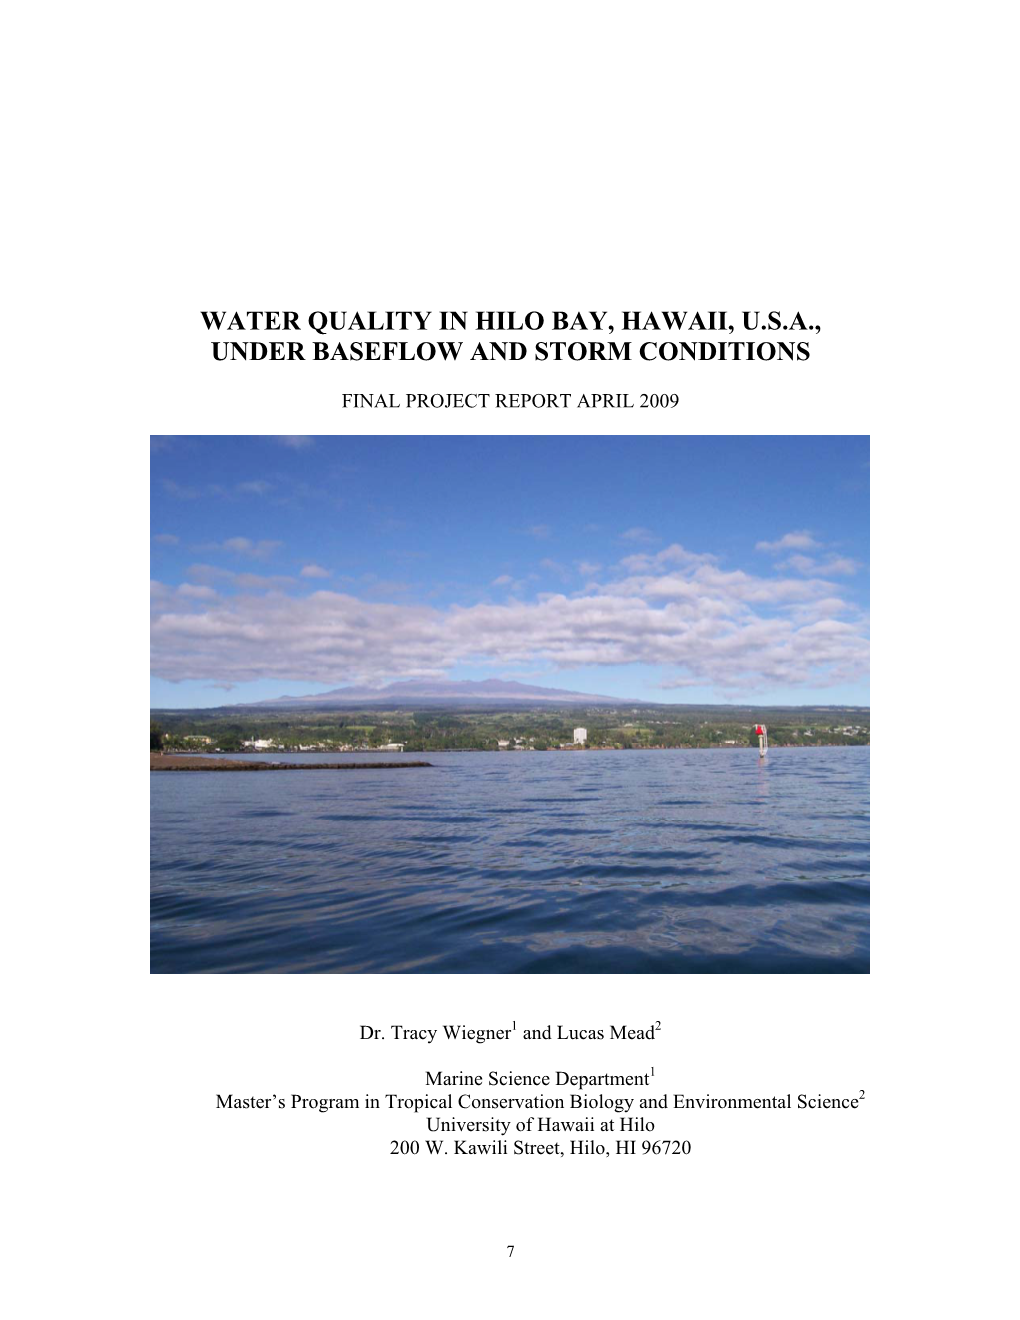 Water Quality in Hilo Bay,Hawaii, USA, Under